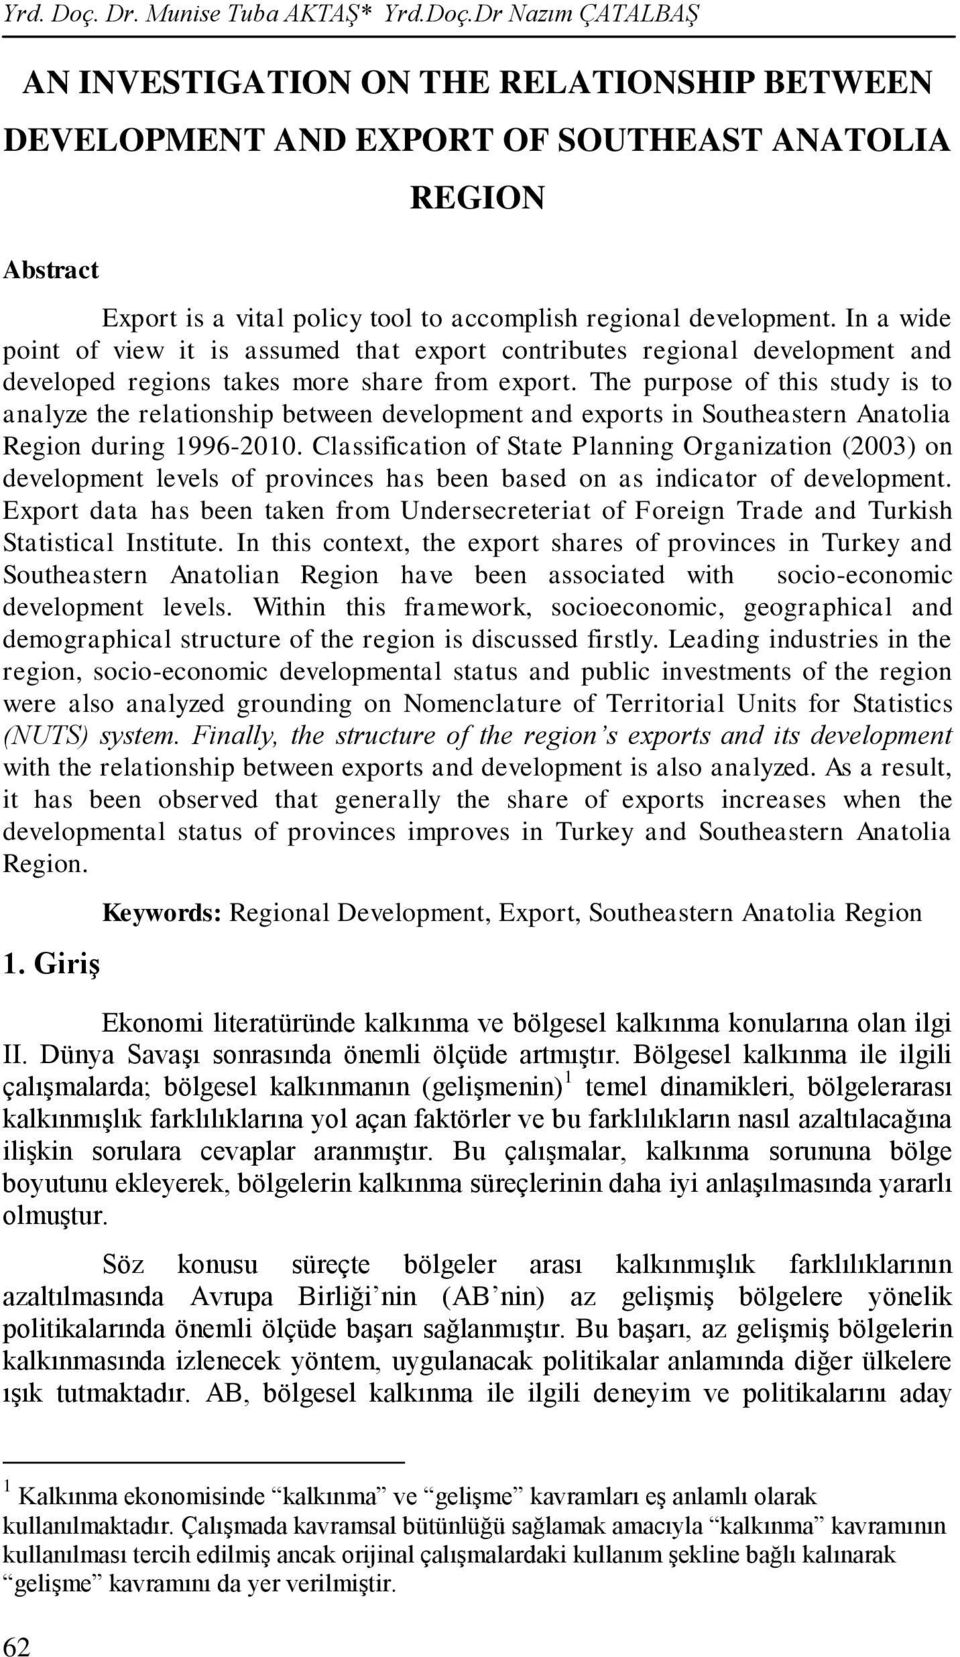 The purpose of this study is to analyze the relationship between development and exports in Southeastern Anatolia Region during 1996-2010.